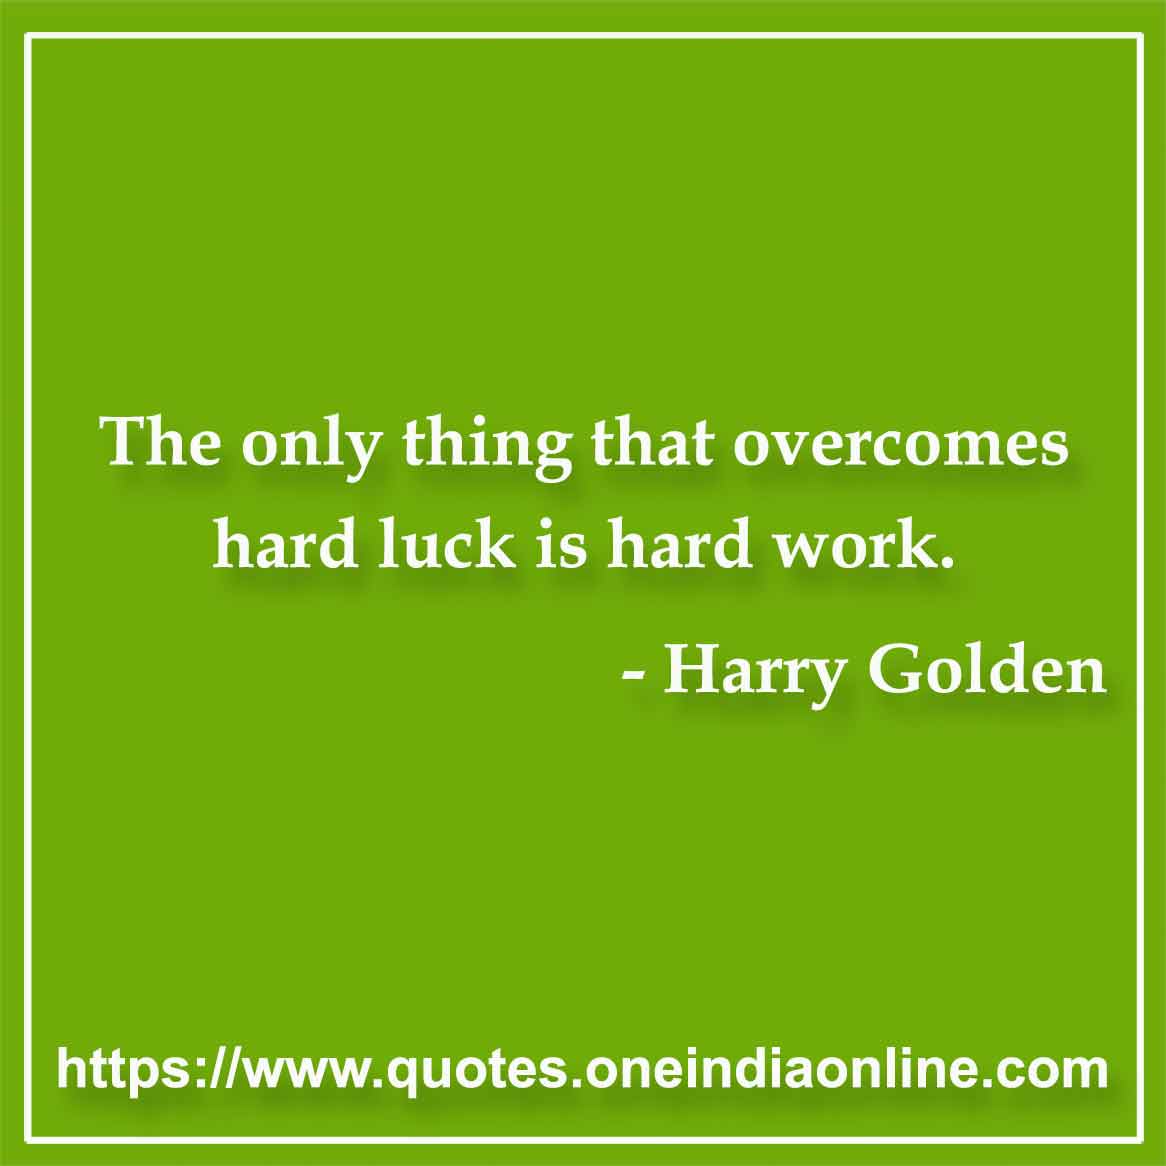 The only thing that overcomes hard luck is hard work.

- Luck Quotes by Harry Golden 